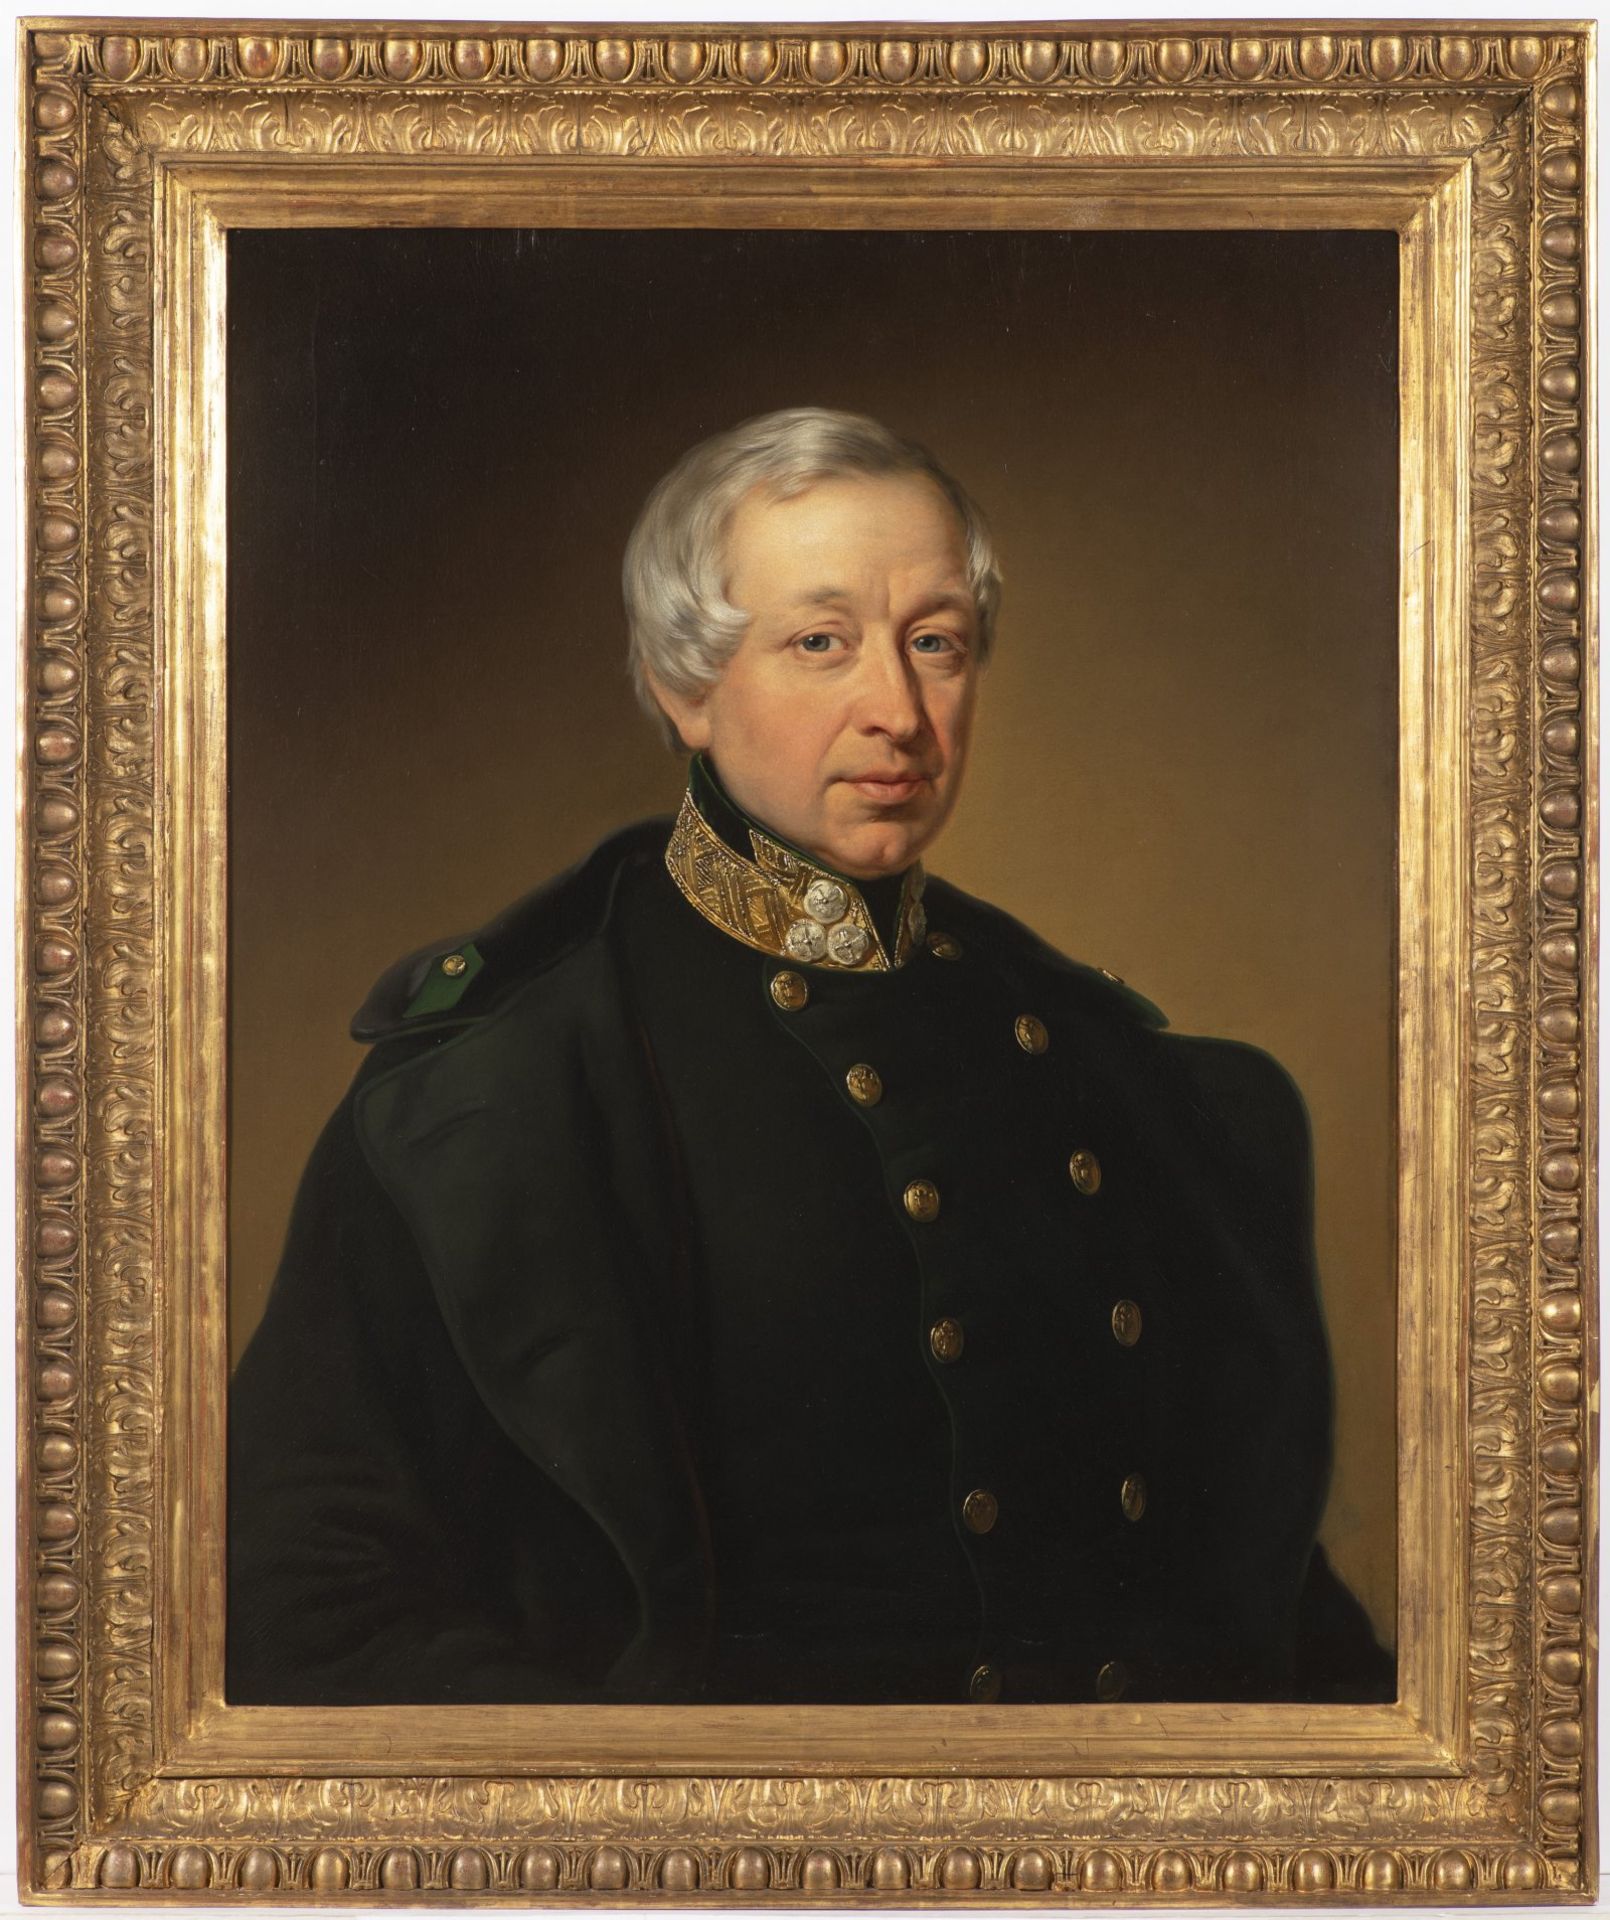 FRANZ EYBL (attributed) 1806 - 1880: PORTRAIT OF A MAN IN UNIFORM After 1849 Oil on canvas 76,5x61